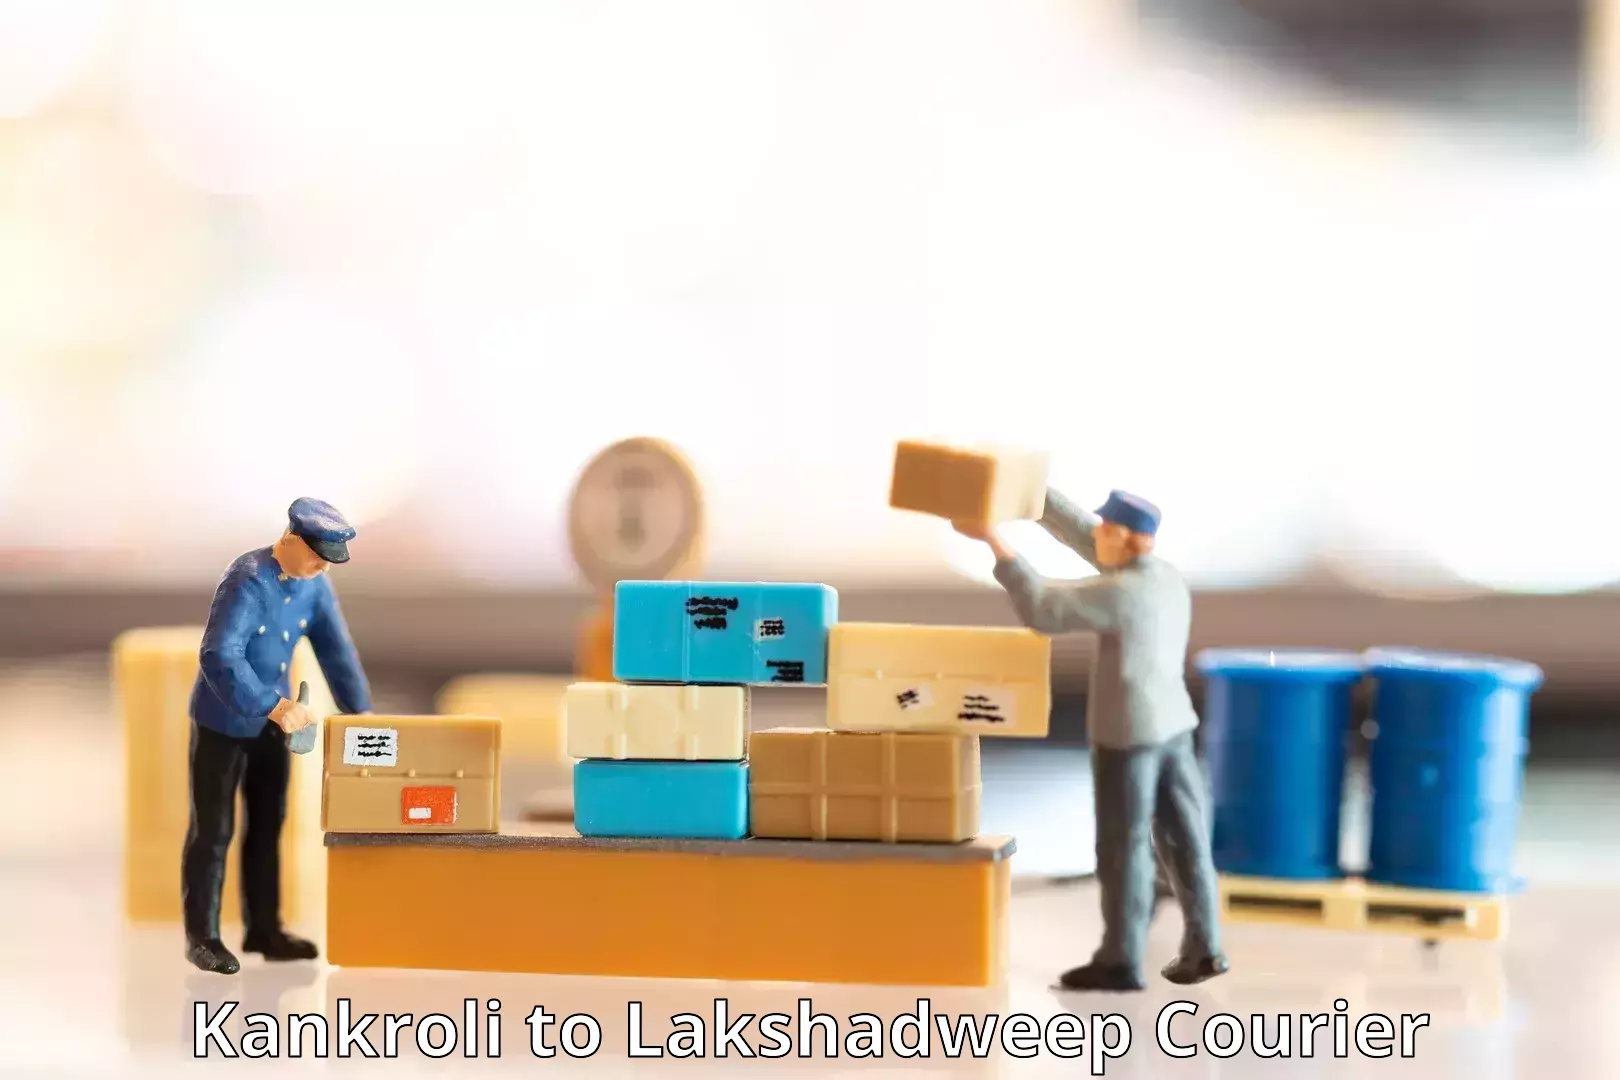 End-to-end delivery in Kankroli to Lakshadweep